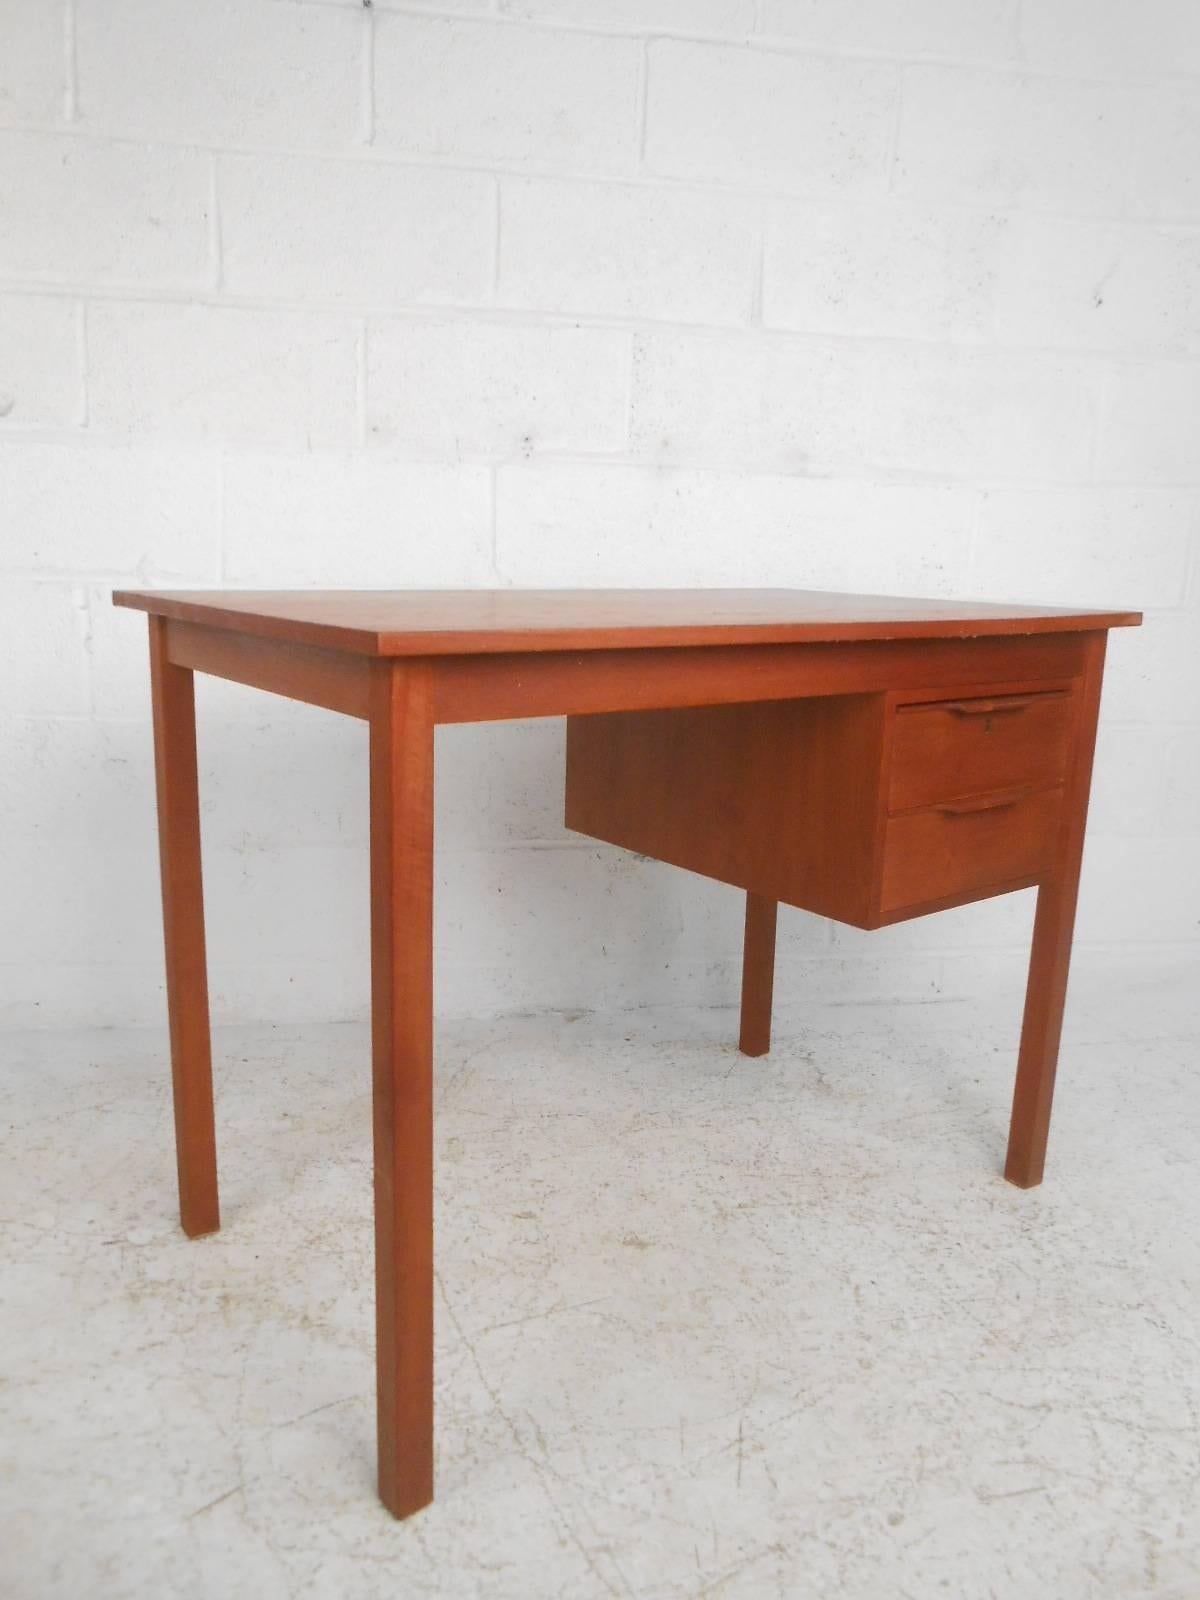 Stunning vintage modern desk features two hefty drawers with unusual sculpted pulls. Sleek compact design offers plenty of work space on the top and ample room for storage within its drawers. Quality craftsmanship with a finished back, long sturdy